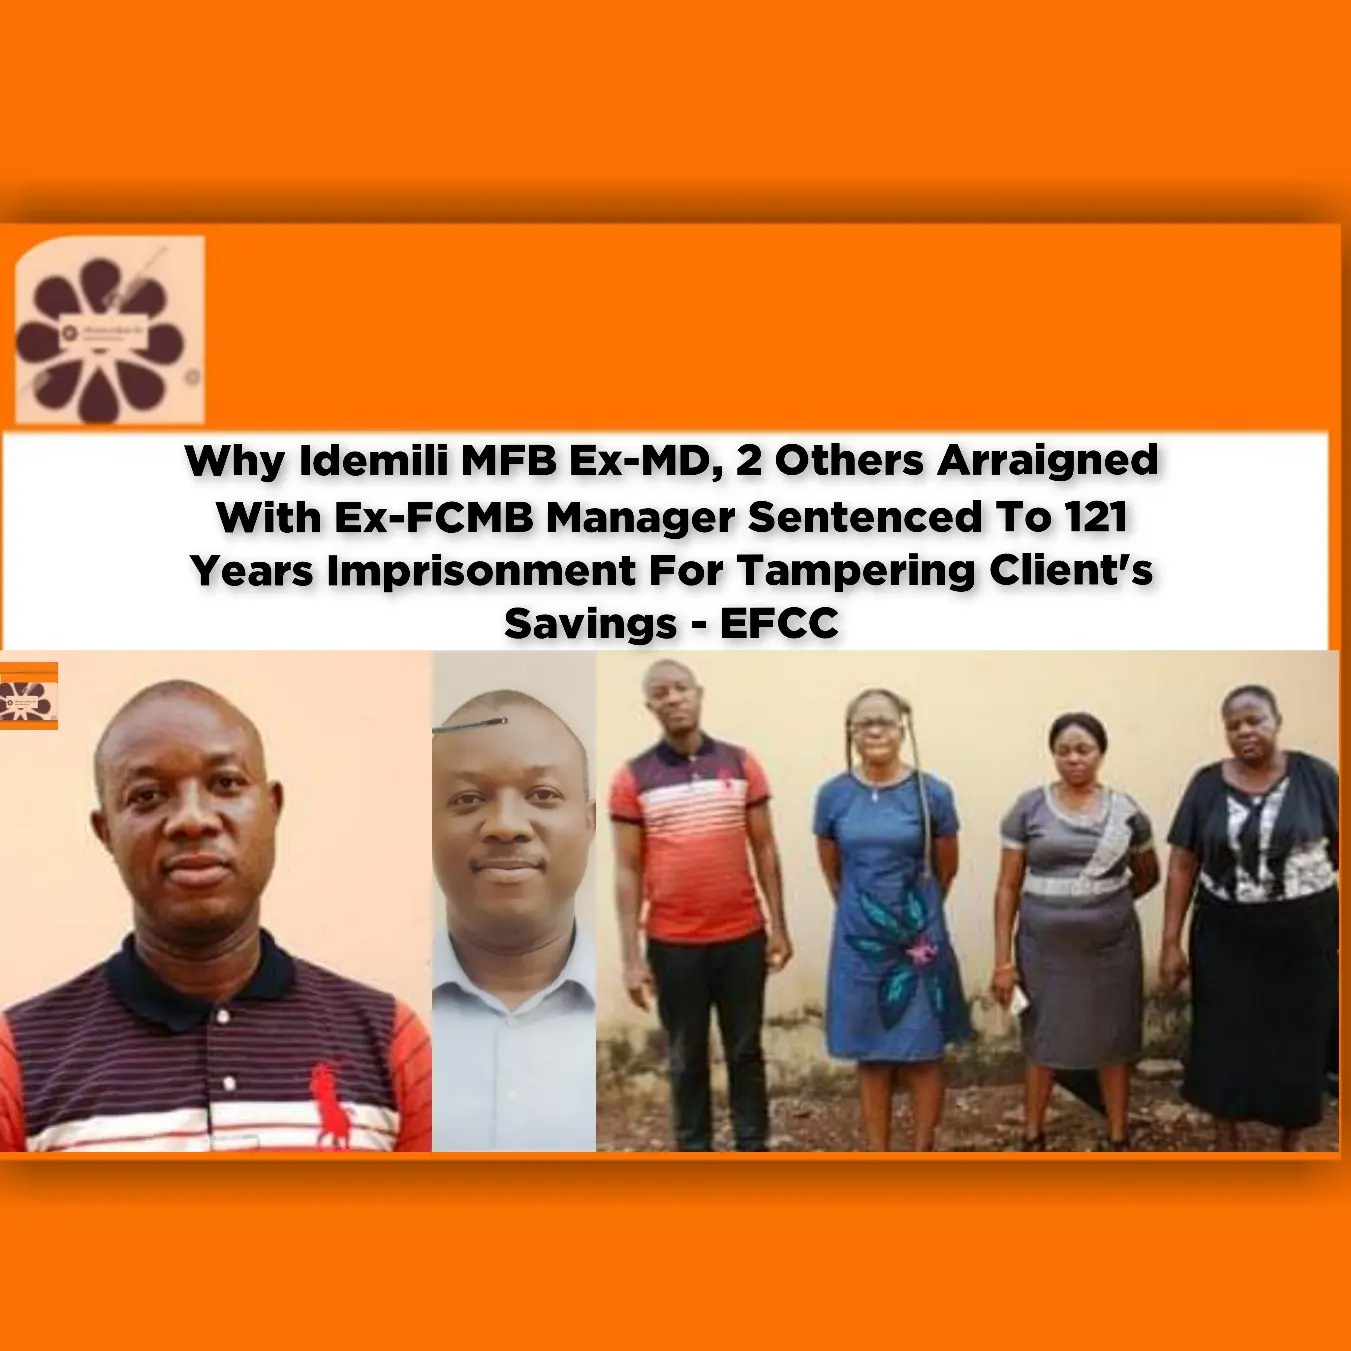 Why Idemili MFB Ex-MD, 2 Others Arraigned With Ex-FCMB Manager Sentenced To 121 Years Imprisonment For Tampering Client's Savings - EFCC ~ OsazuwaAkonedo #Obidients